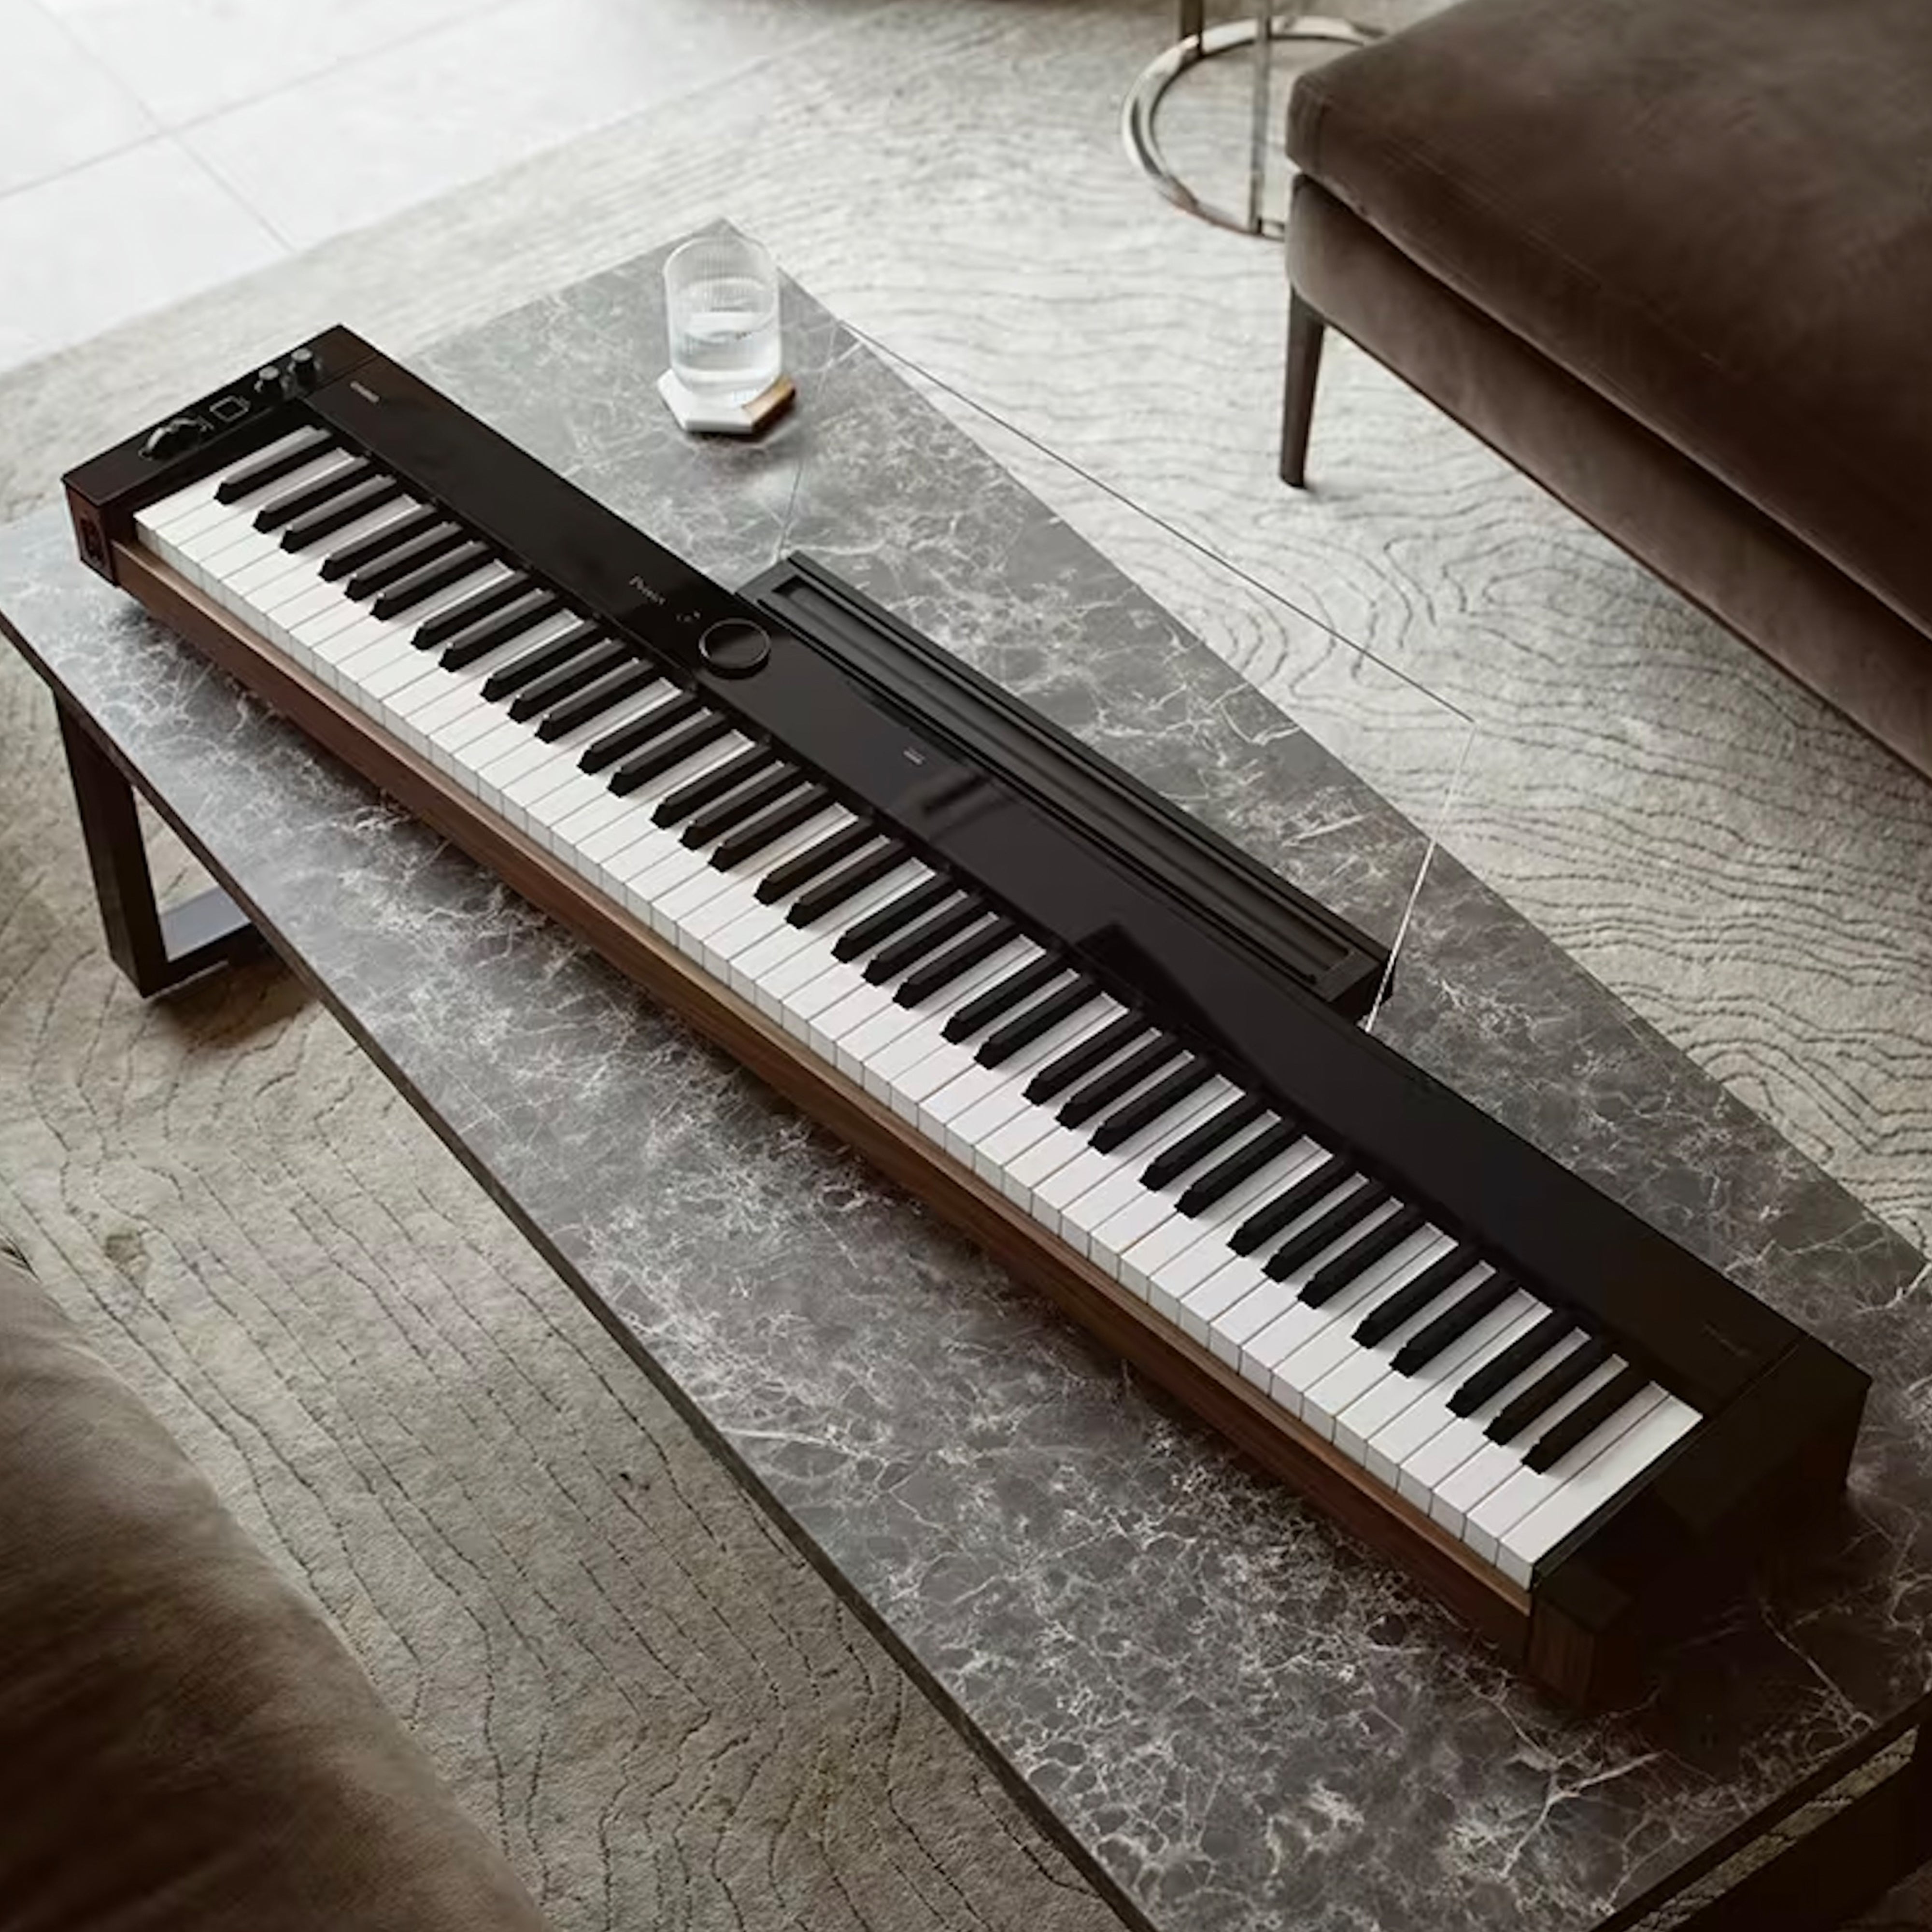 Casio PX-S6000 Digital Piano - Black - on a coffee table in a modern living room